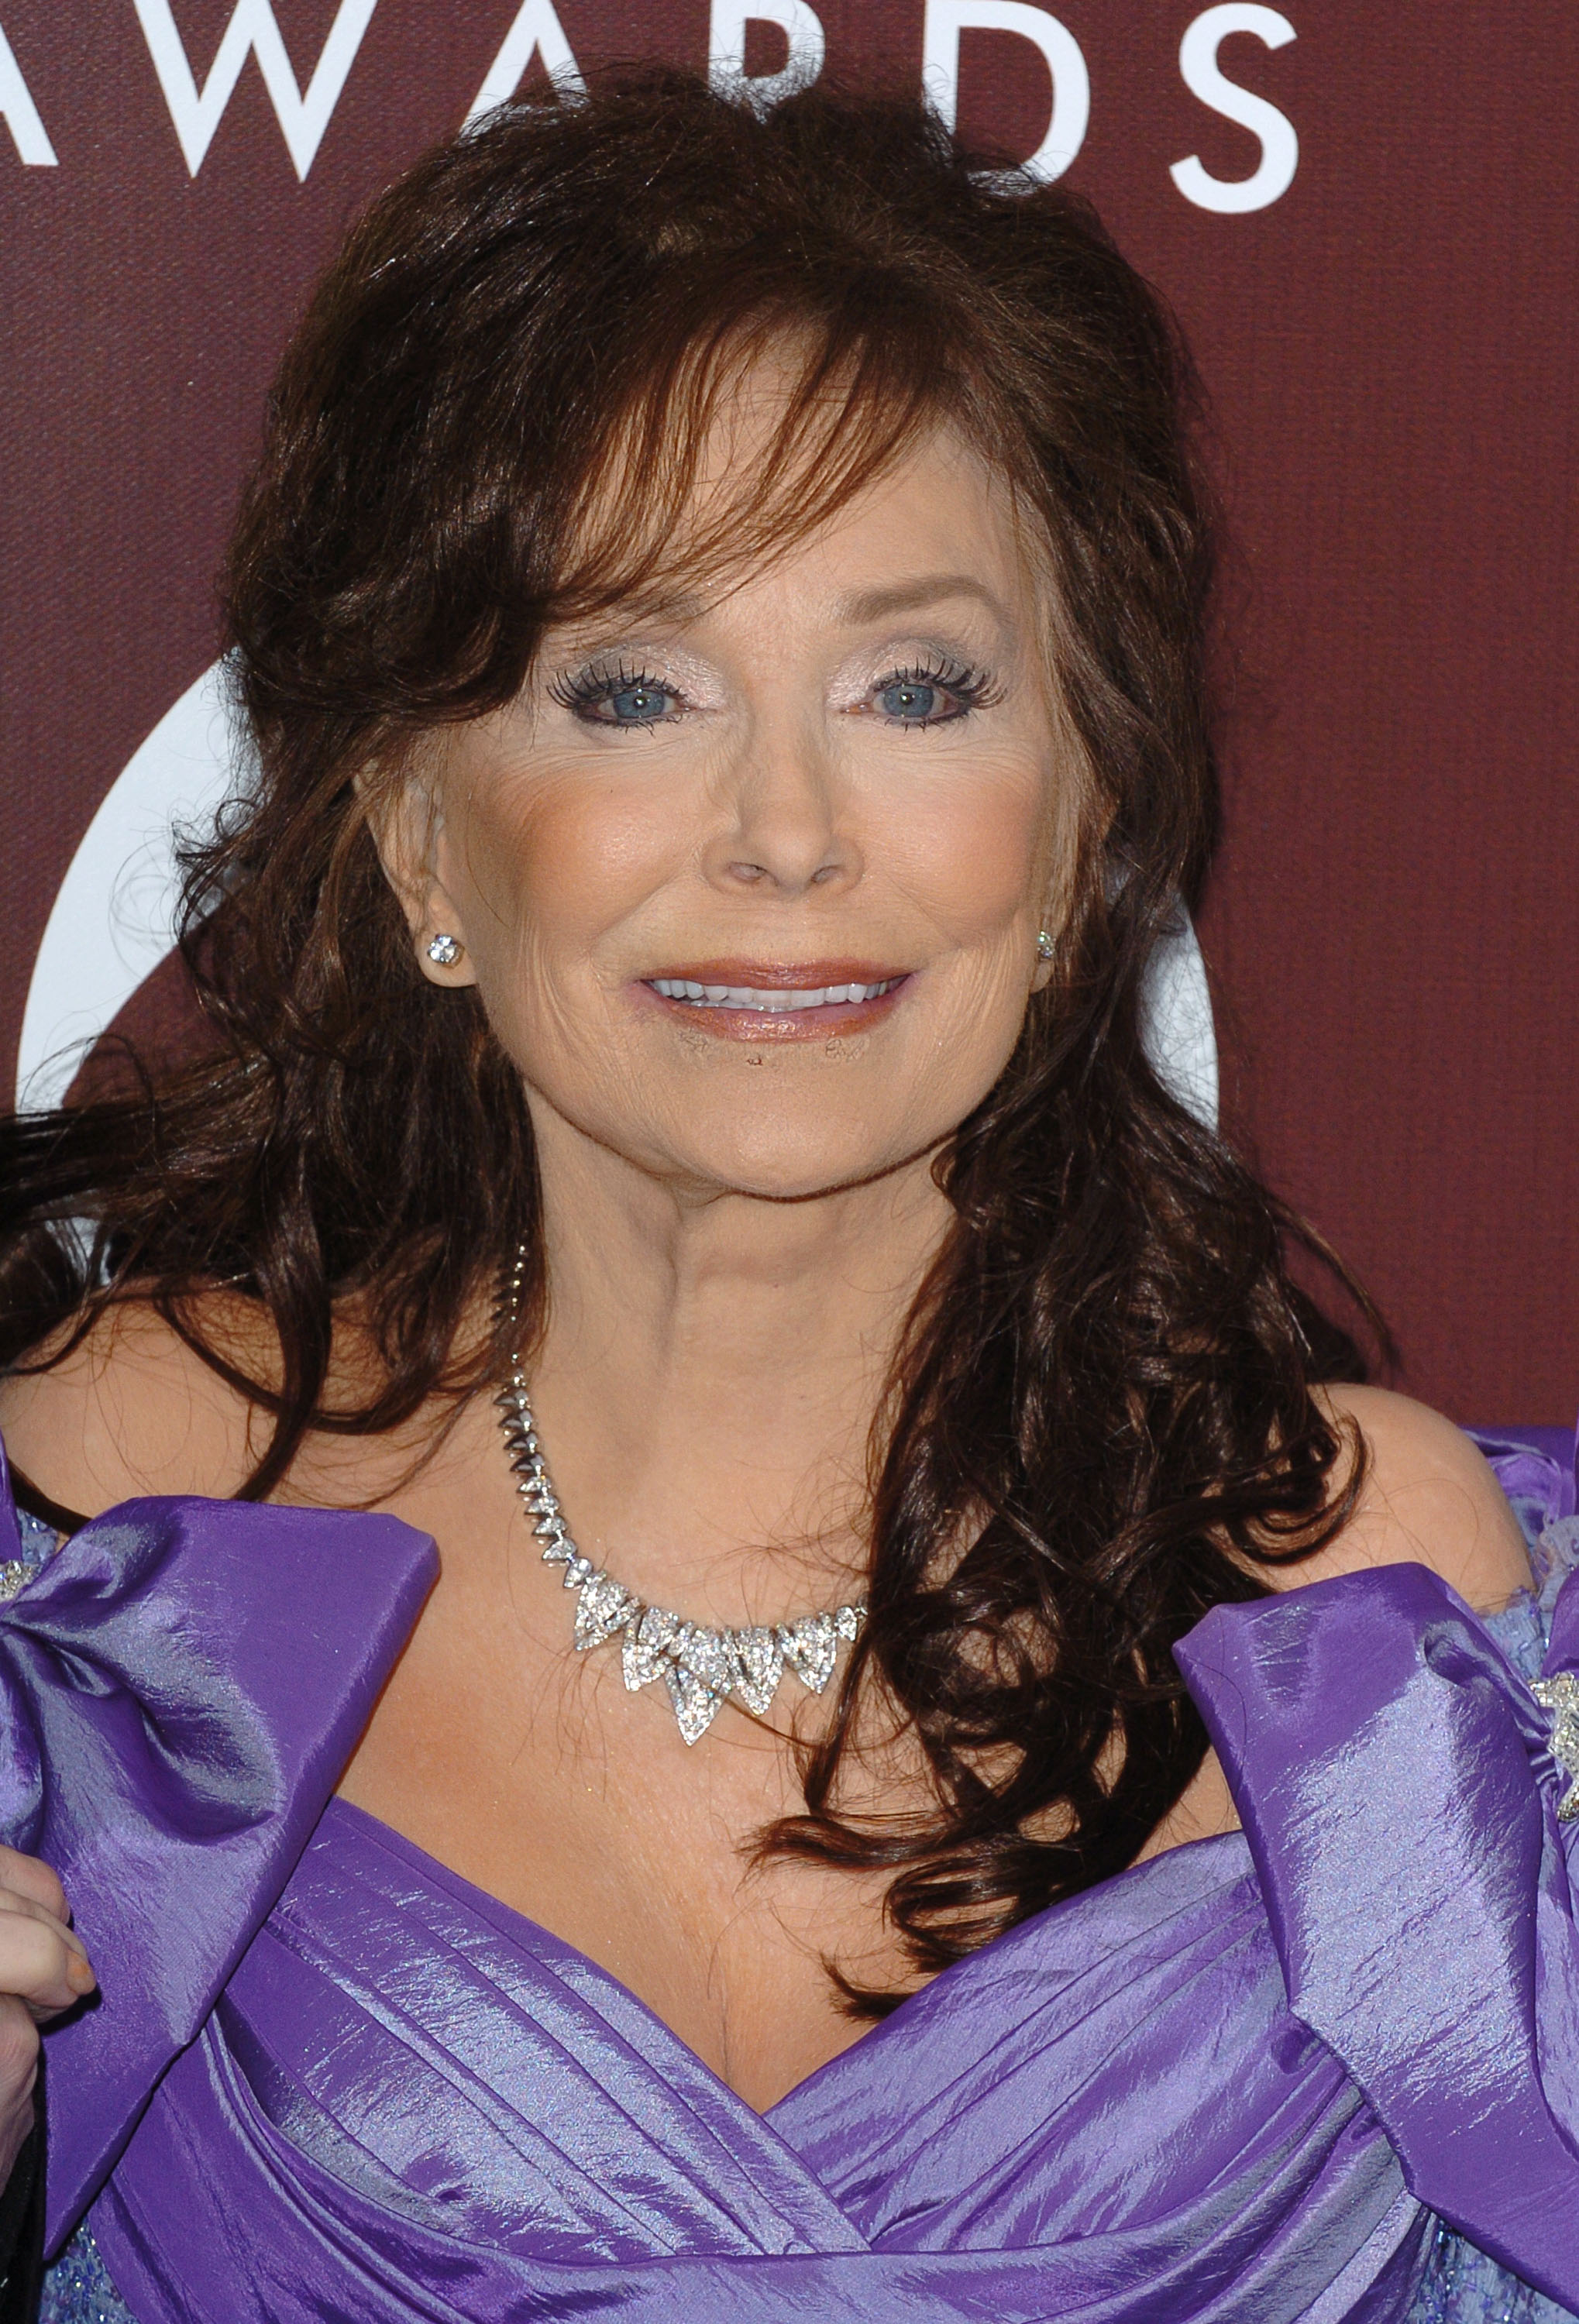 Loretta Lynn at the 47th Annual GRAMMY Awards - Arrivals, on February 13, 2005. | Source: Getty Images